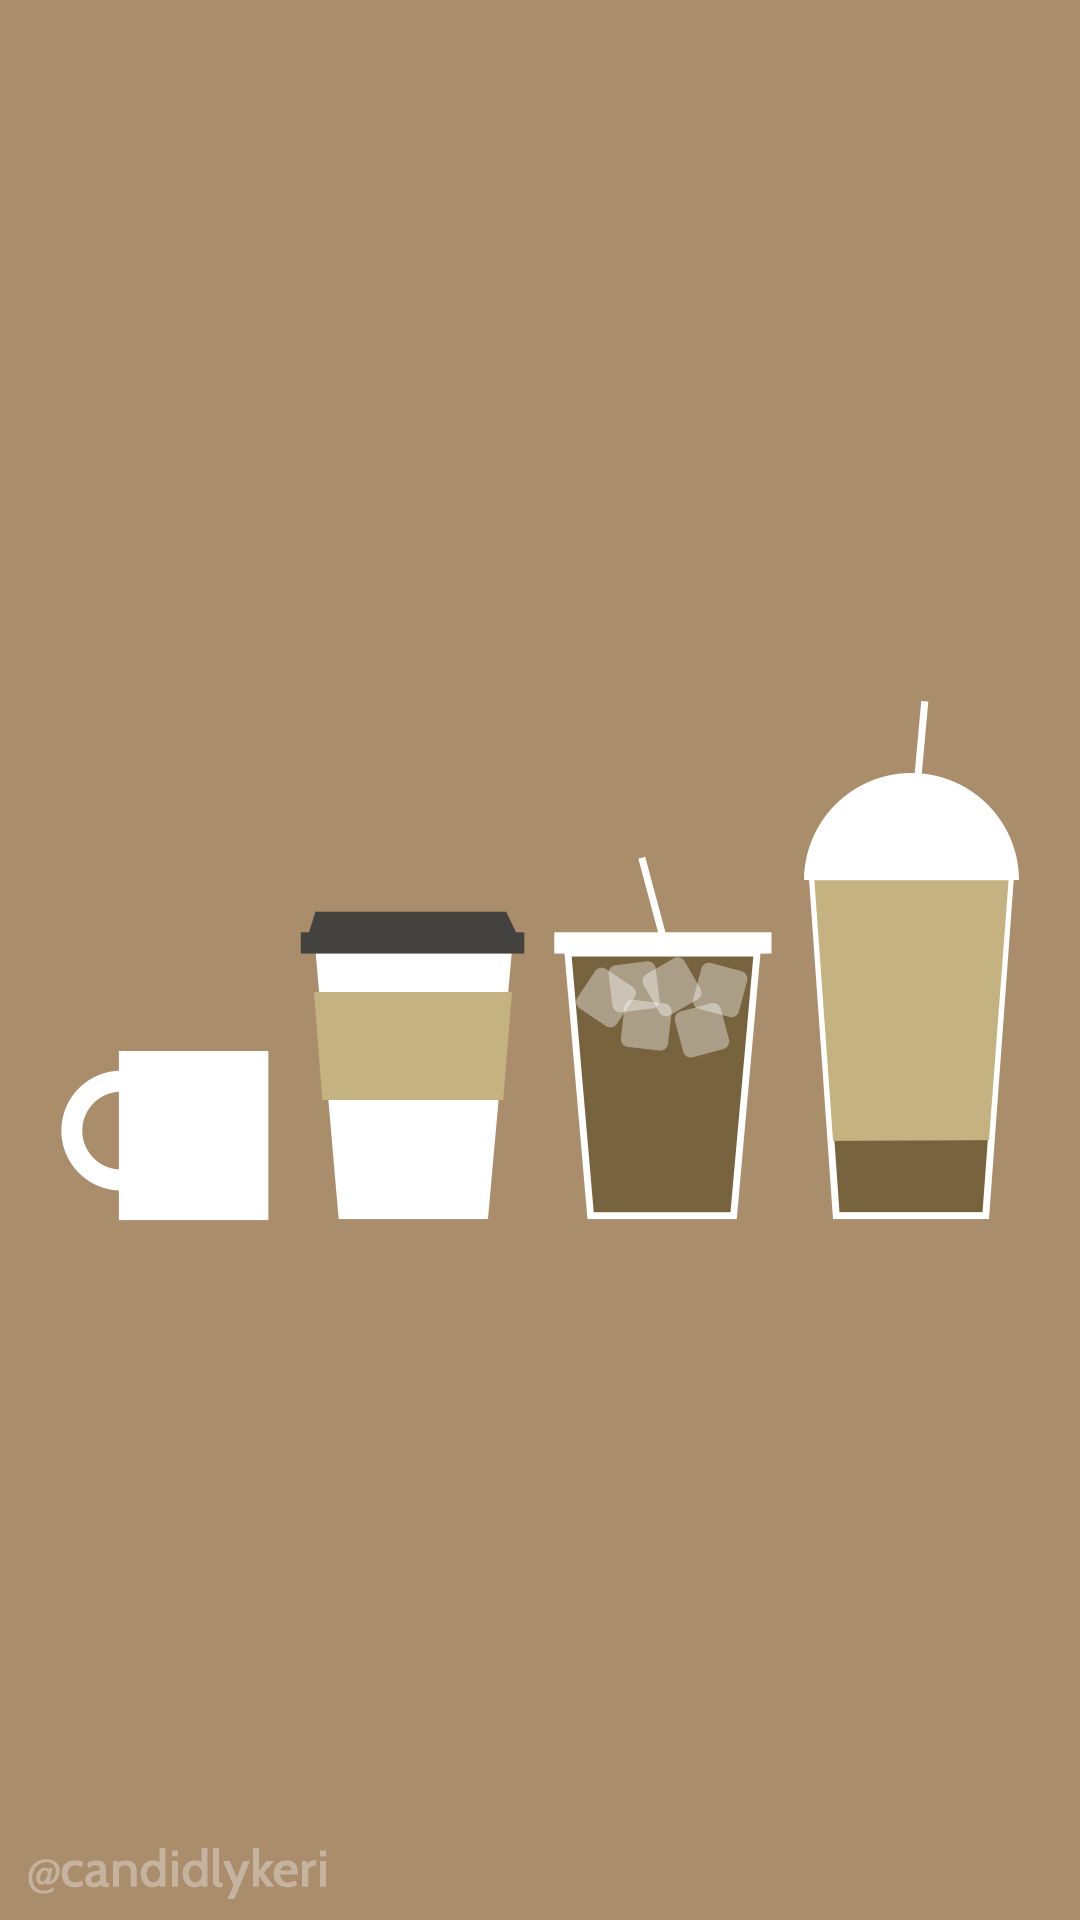 A poster that shows the different stages of coffee - Coffee